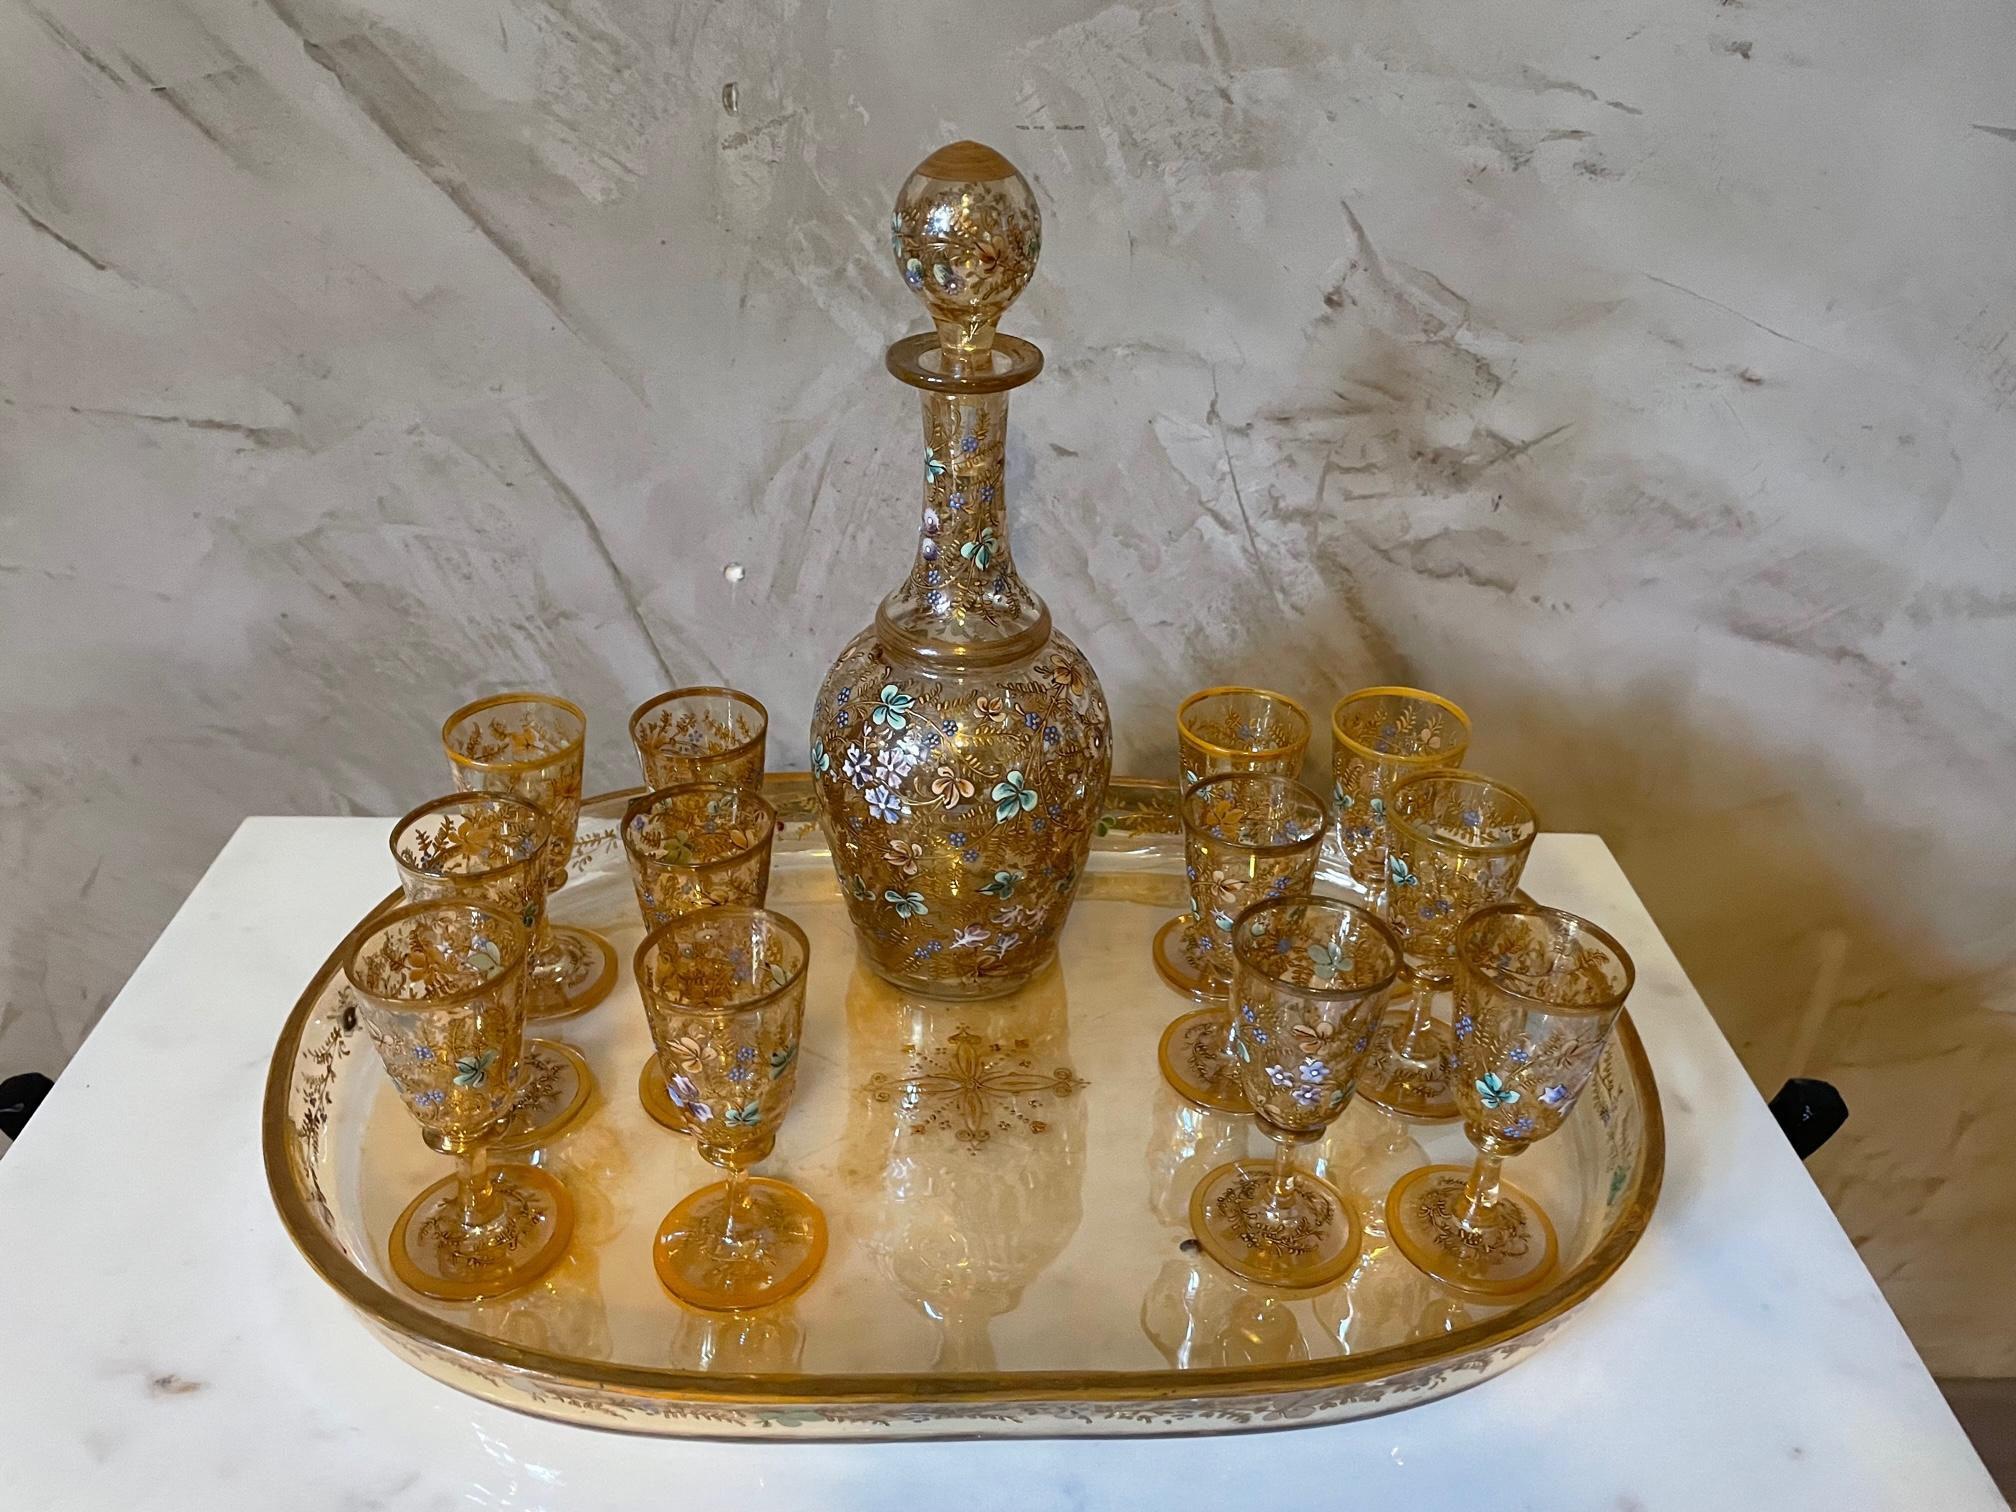 20th Century French Enameled Glass Liquor Service with Tray, 1900s 9